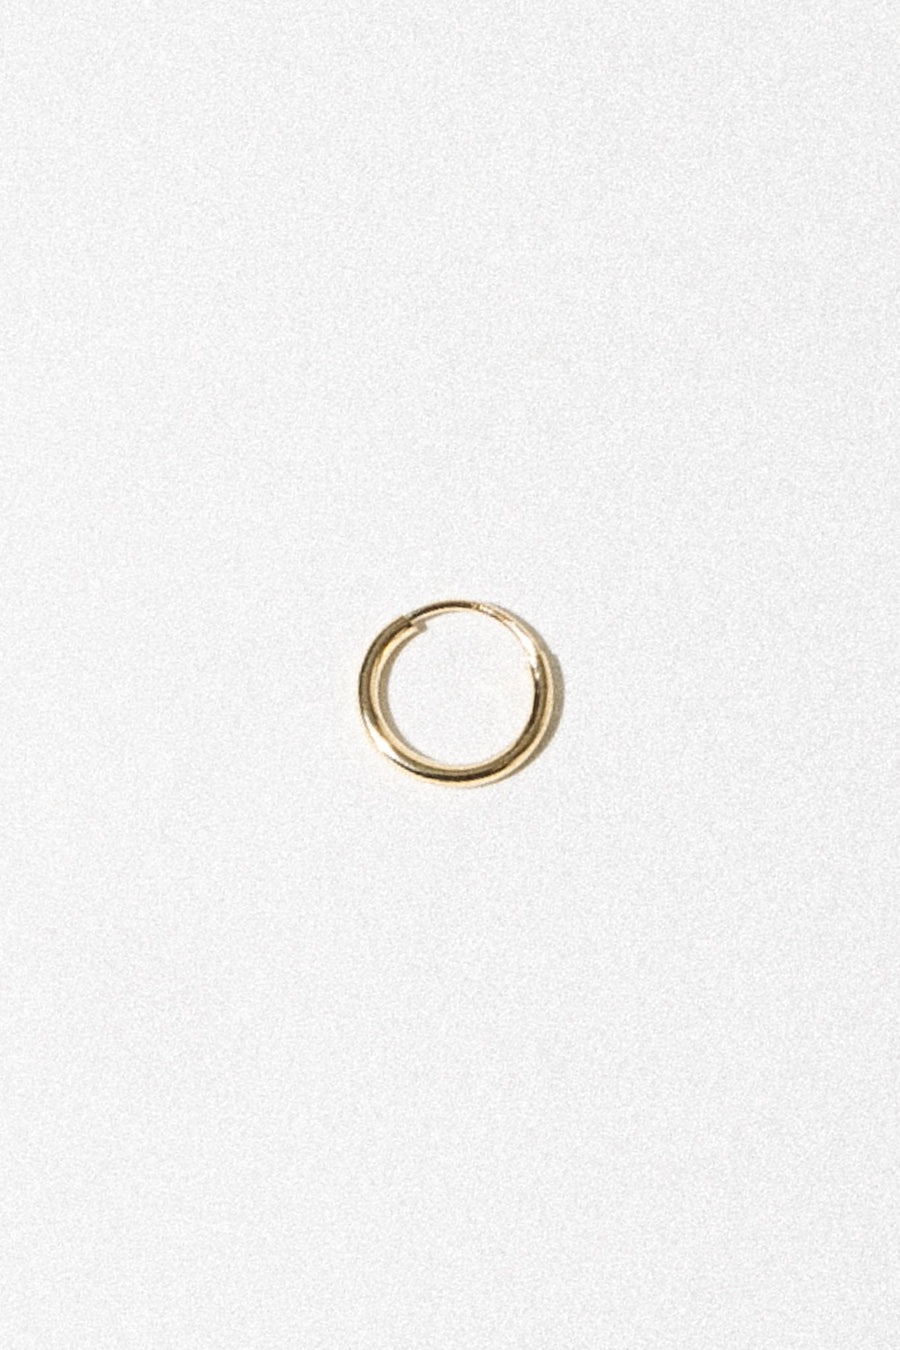 Gempacked Jewelry Small - 9mm / Gold / FINAL SALE Endless Gold Hoop Earring